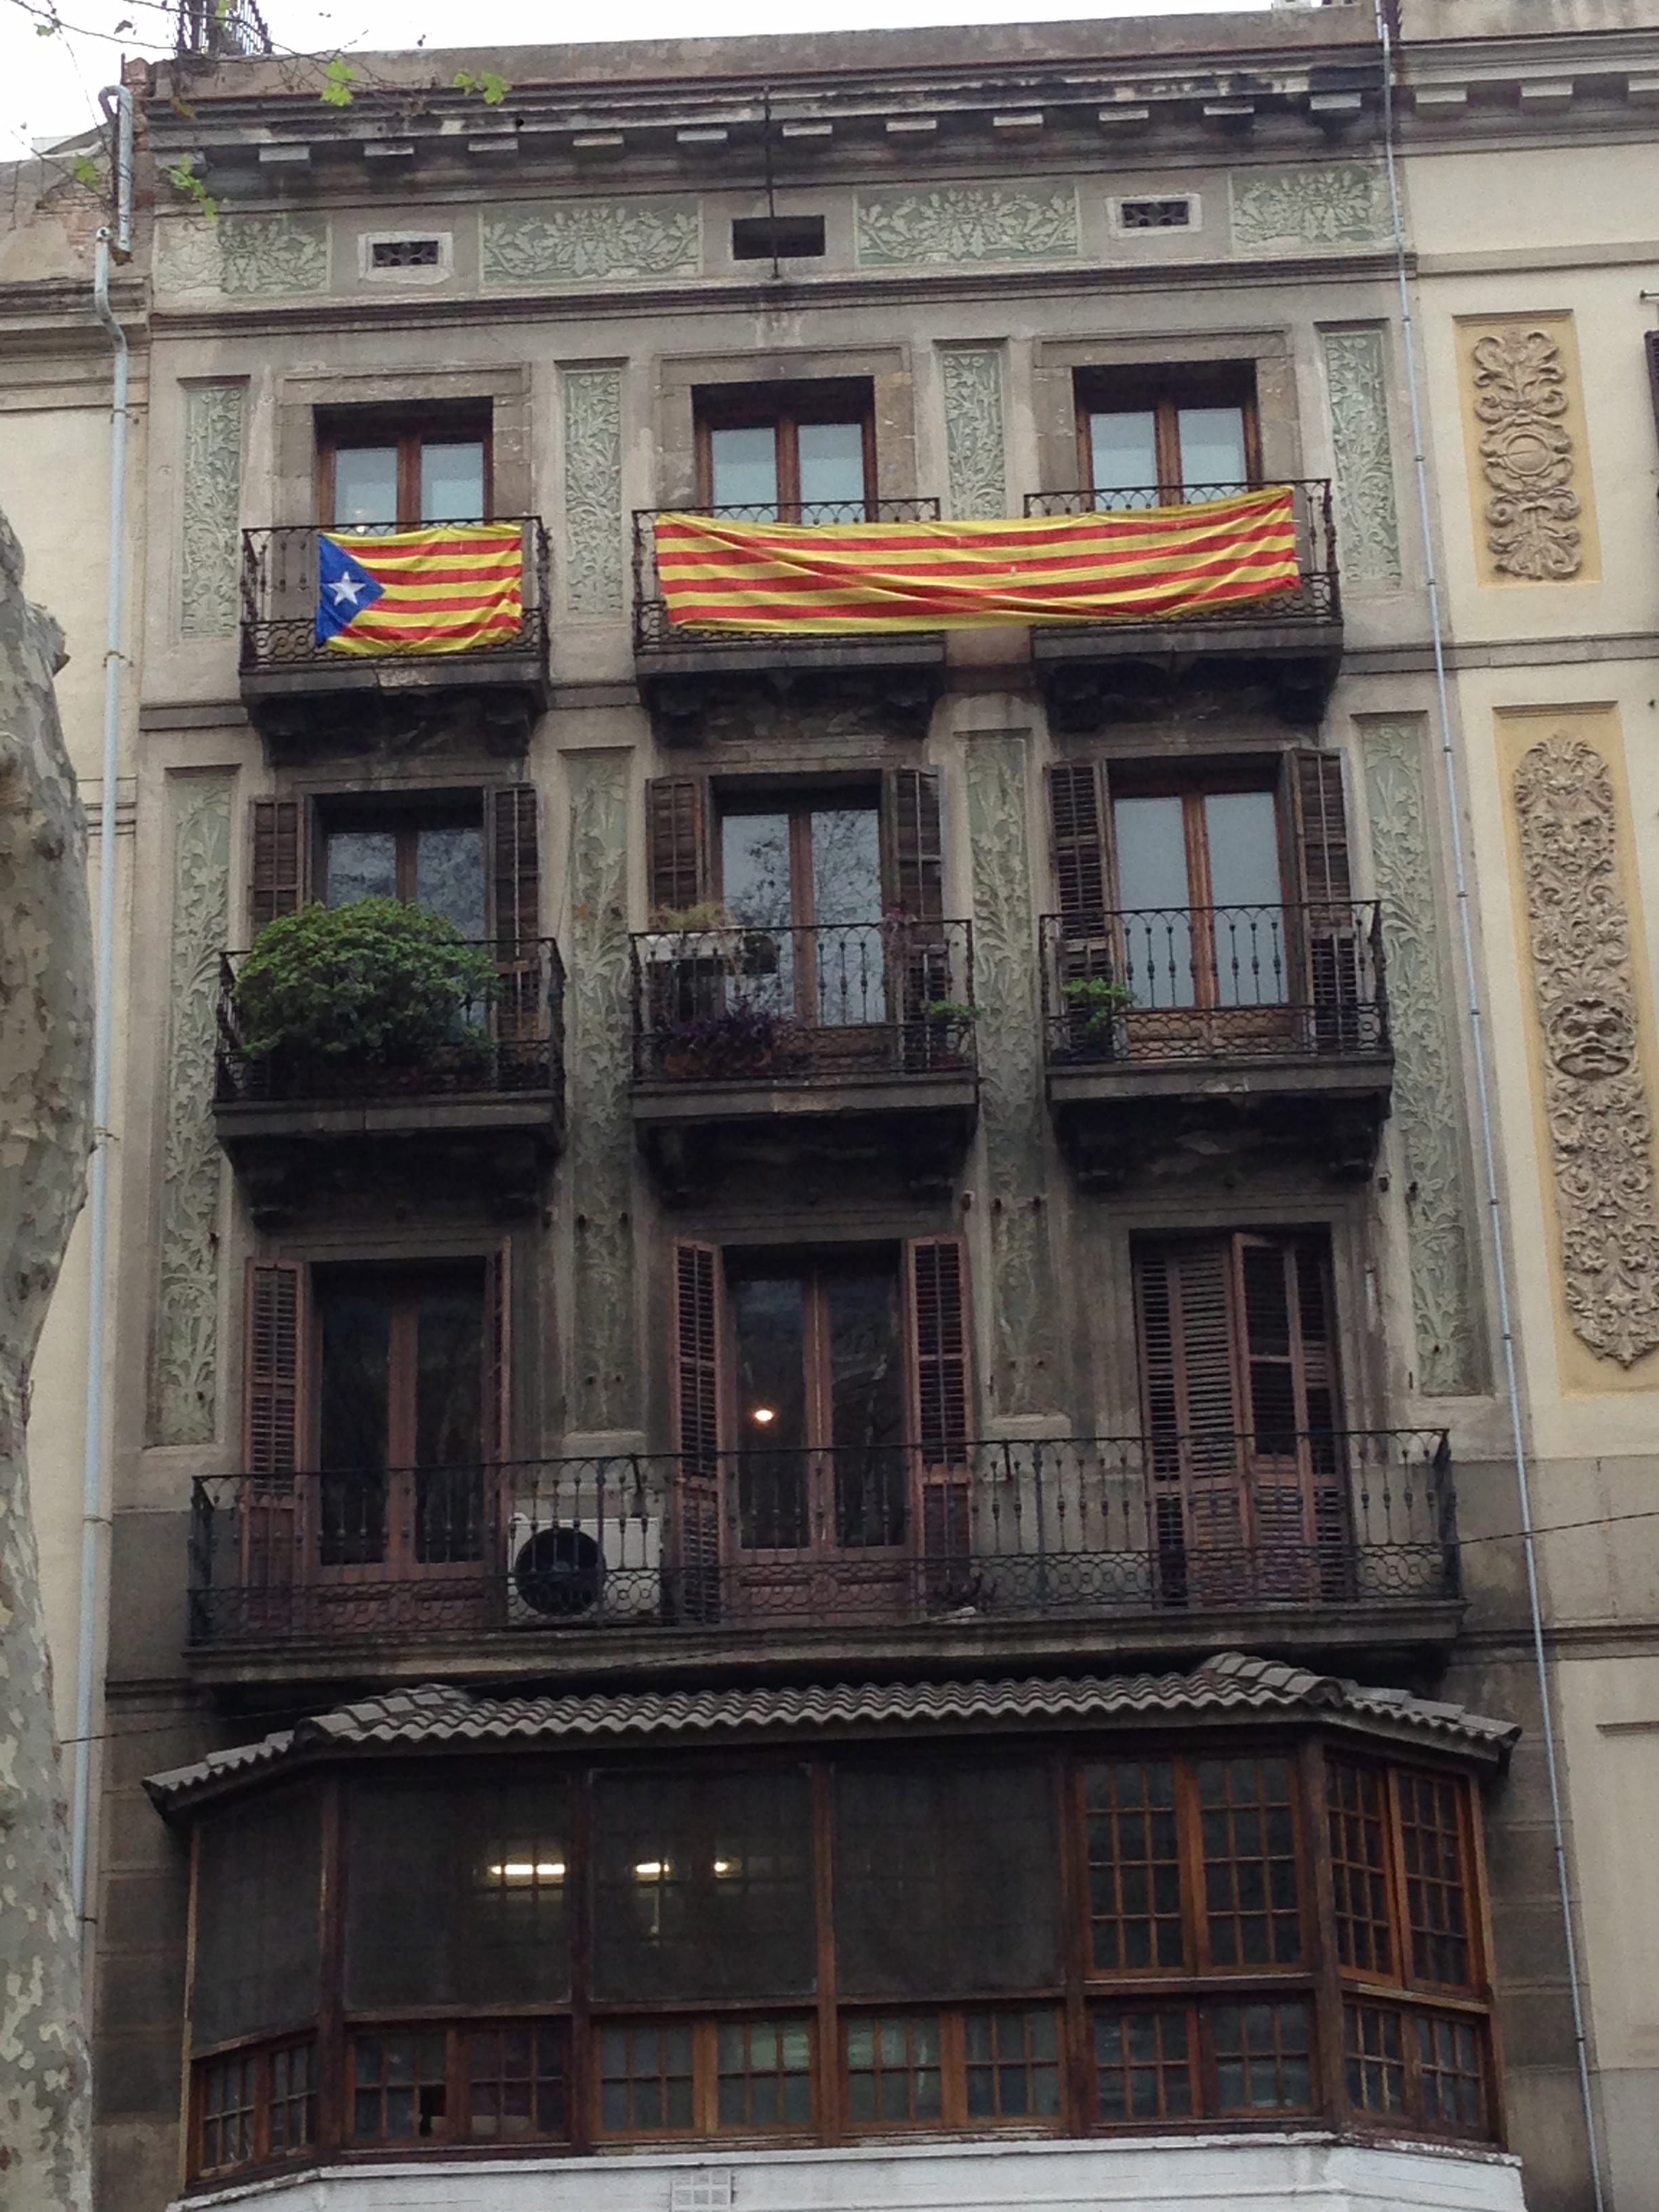 Catalan flags are common in the region, but as momentum for secession has increased in the last few months, so has the presence of Catalan independence flags.